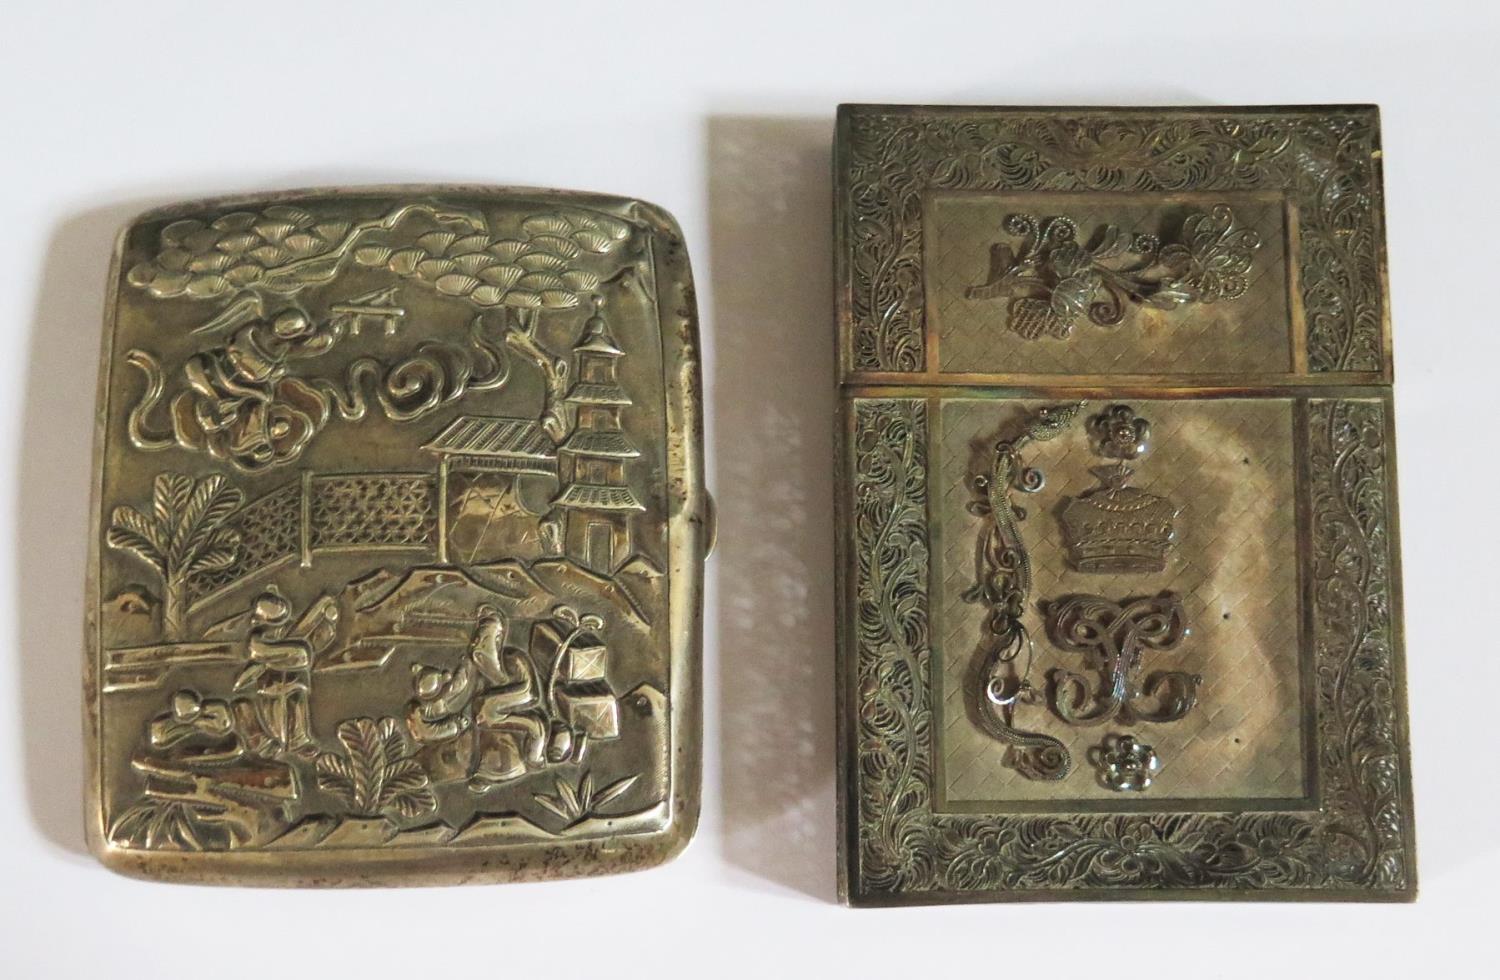 A Chinese Silver Cigarette Case decorated with an embossed landscape scene with figures, the